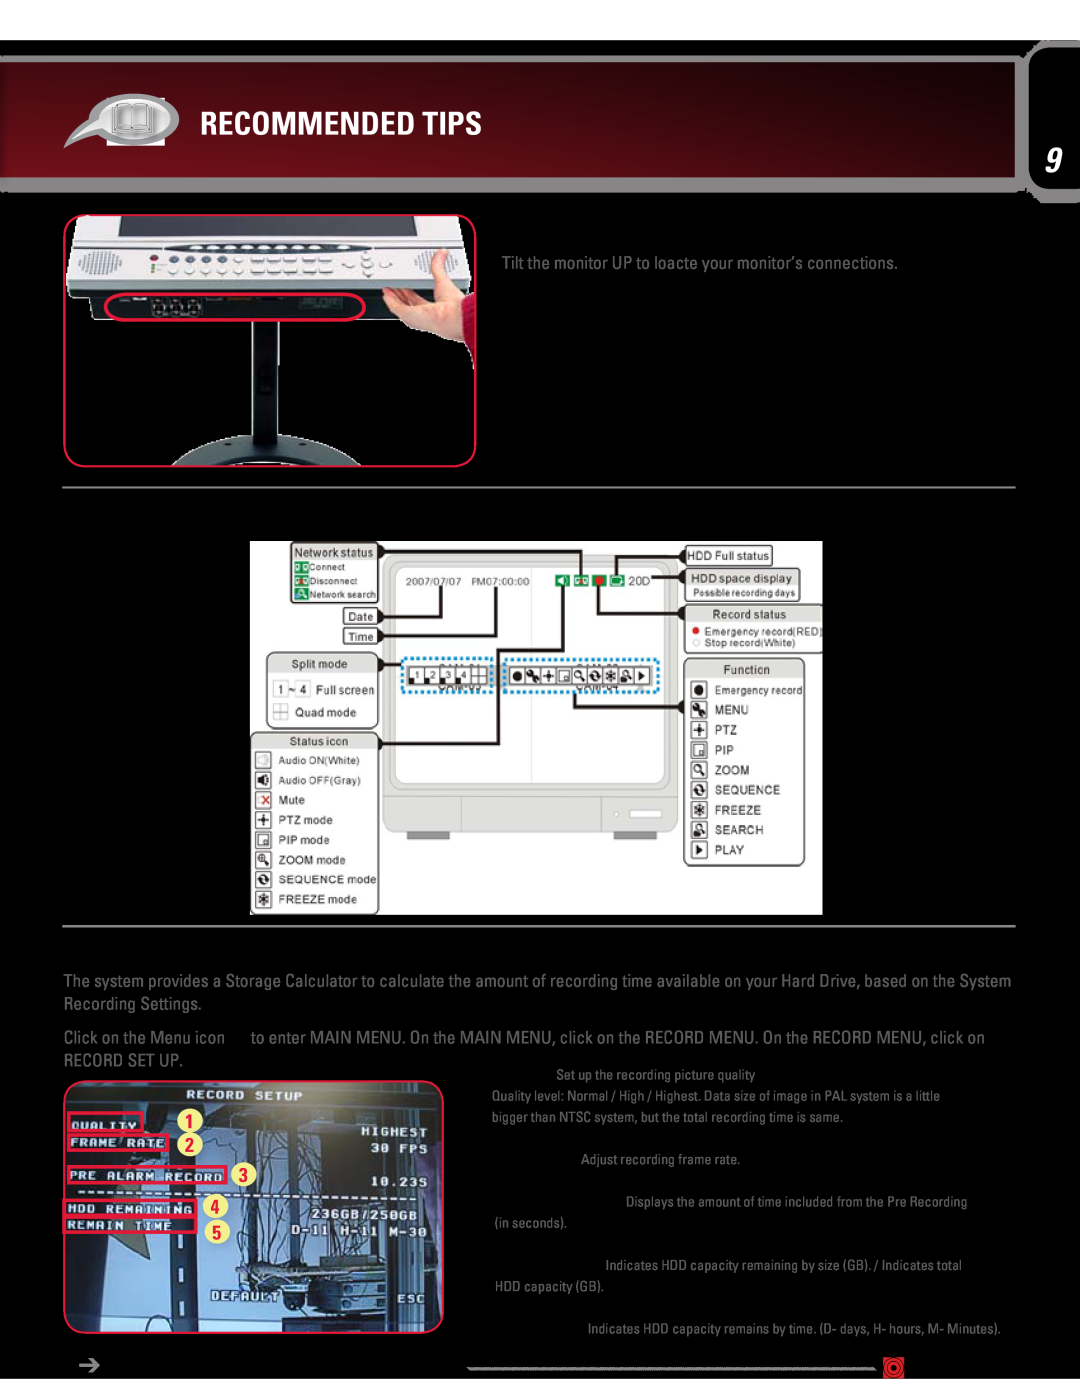 LOREX Technology LD17LD420, L15LD420 recommended tips, Locate Monitor Connections, Display Configuration / Function Icons 